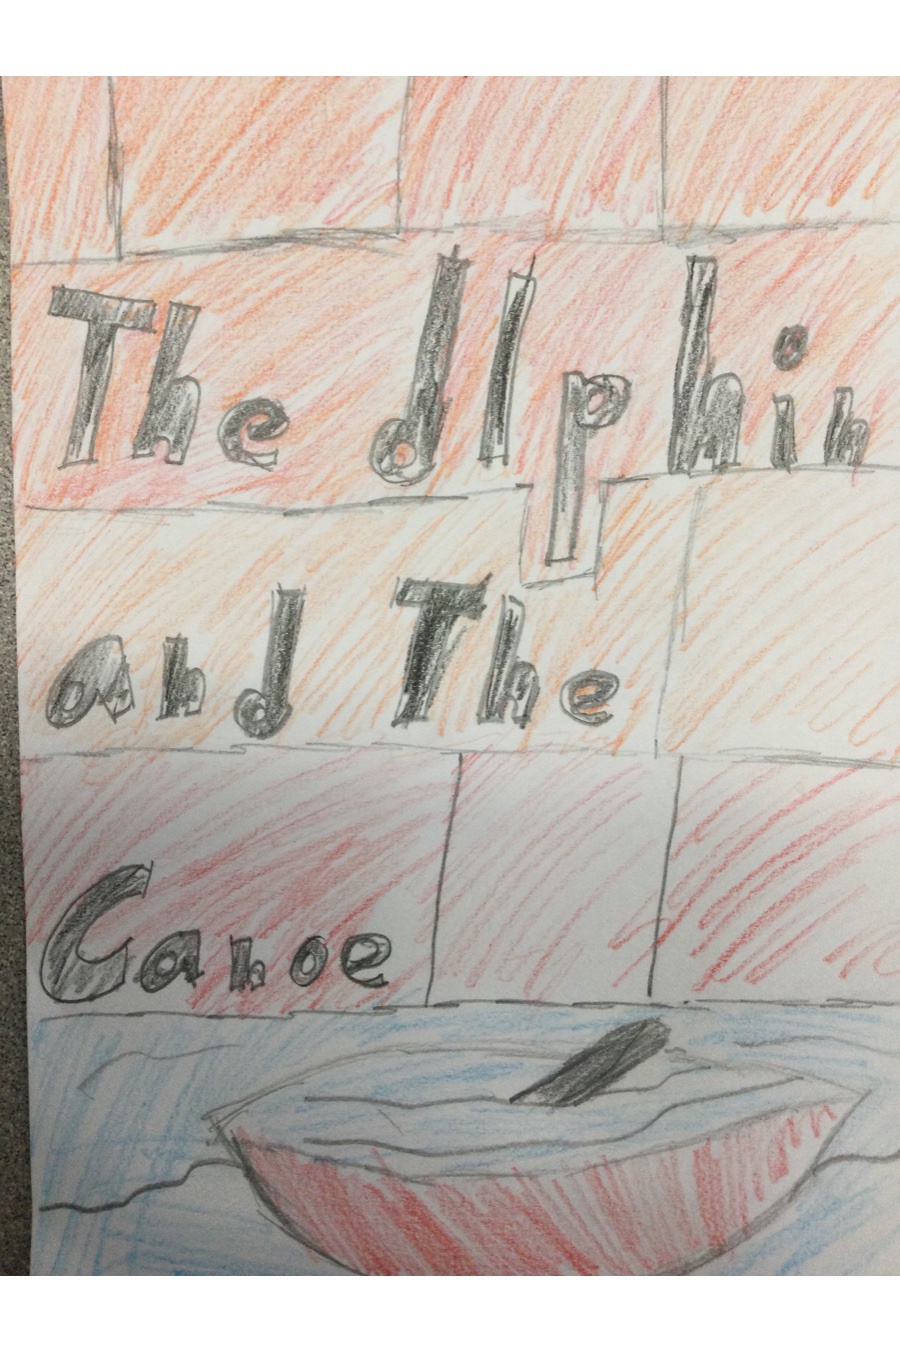 The Dolphin and the Canoe by Jonathan W